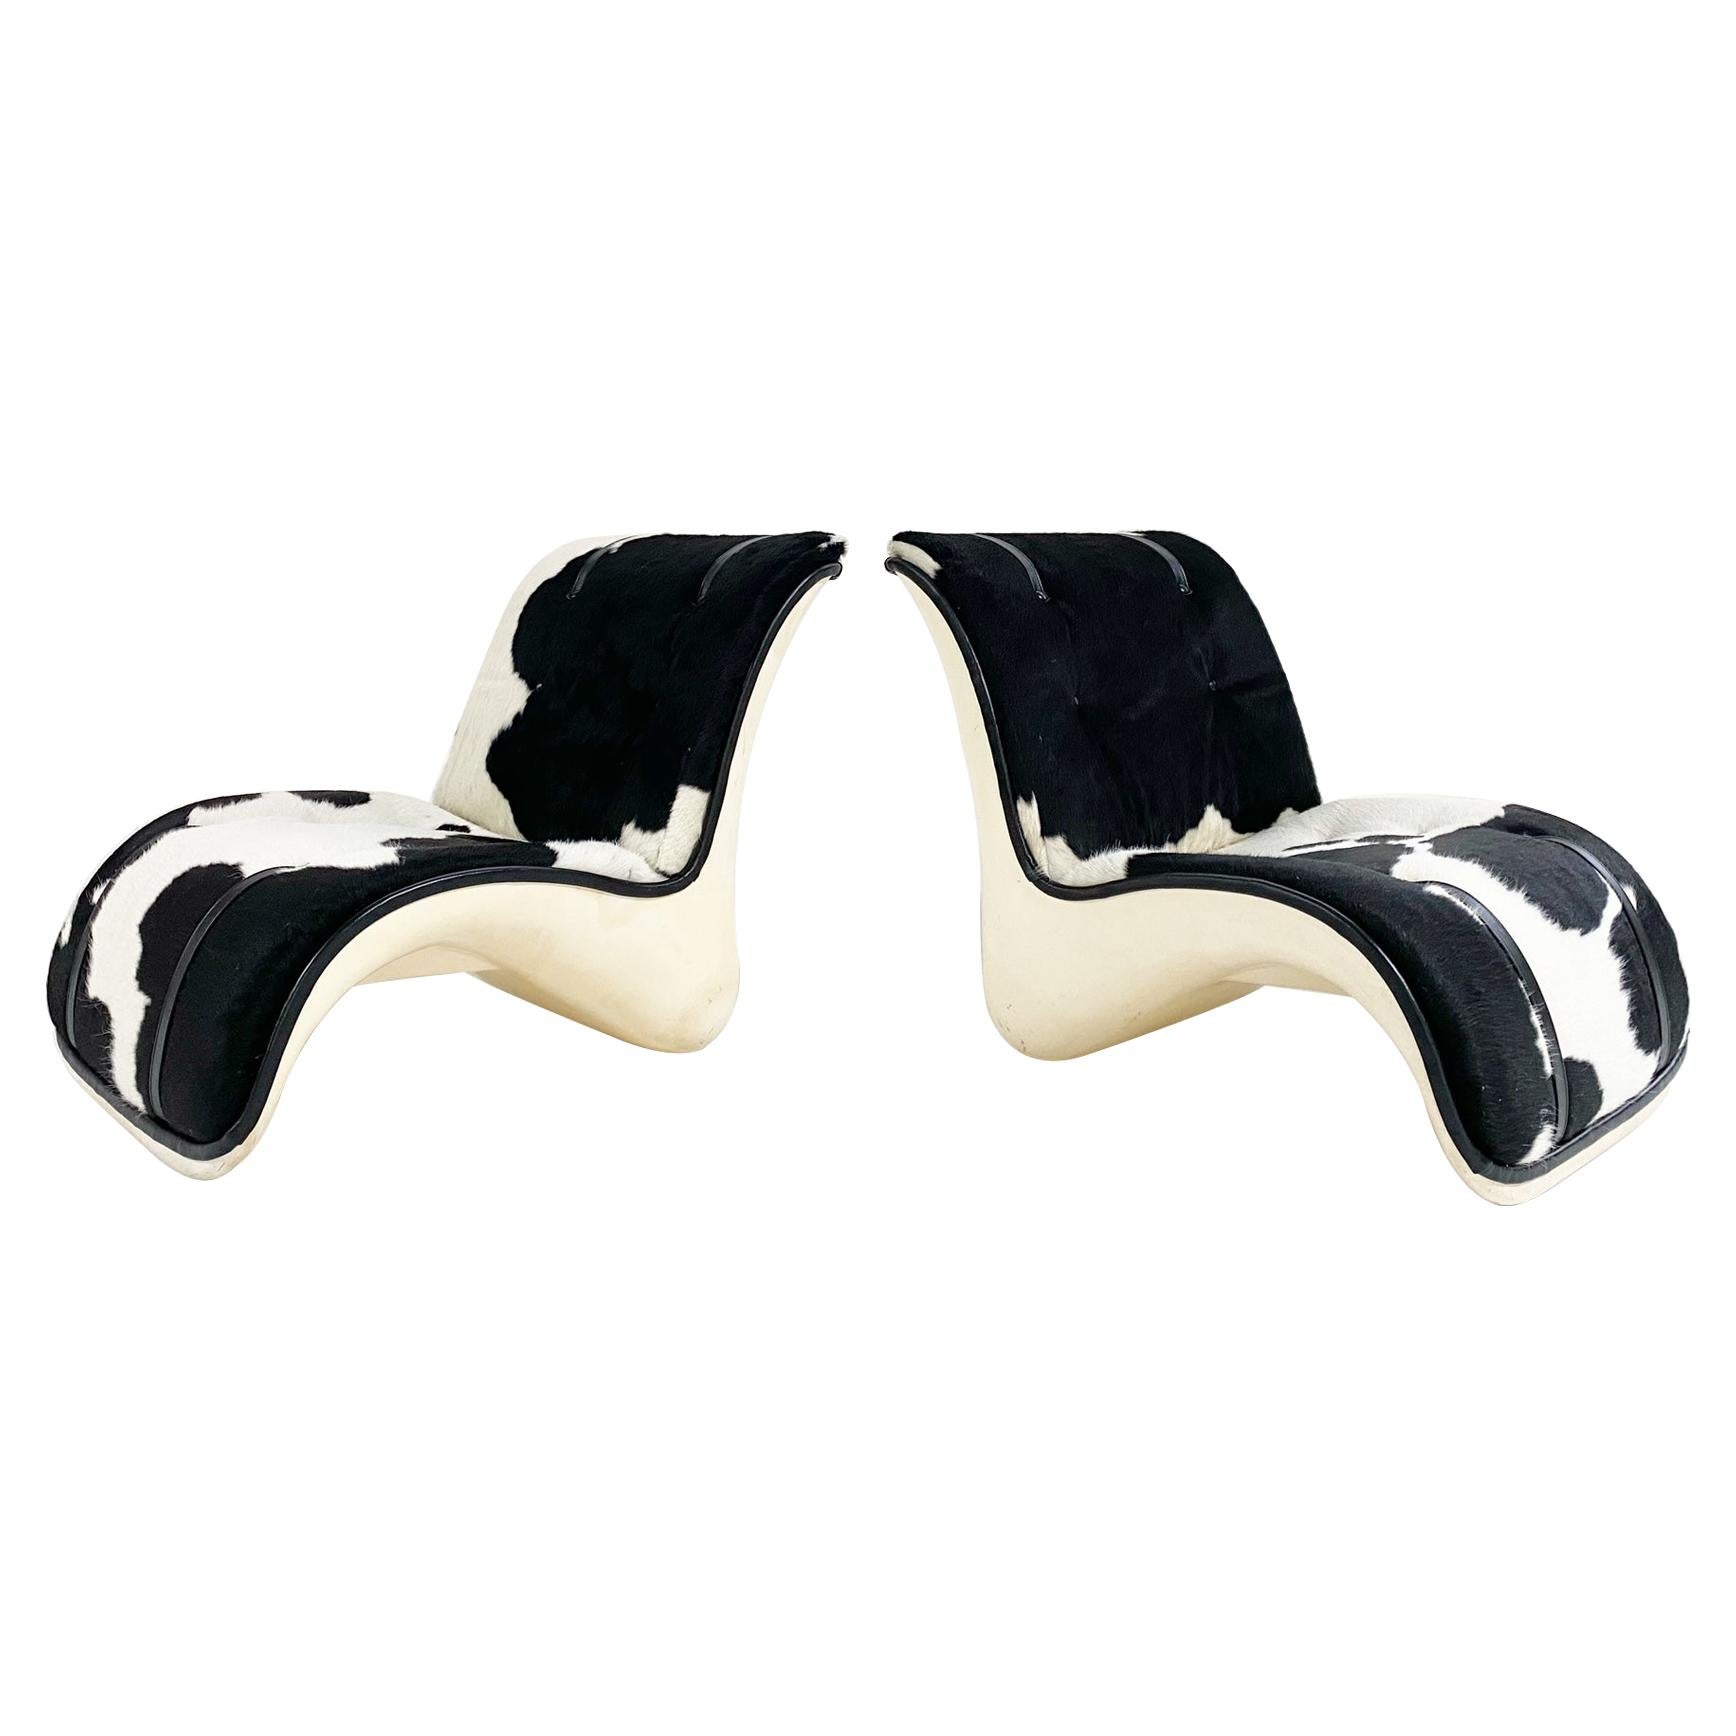 Verner Panton Fiberglass Lounge Chairs in Brazilian Cowhide and Leather, Pair For Sale